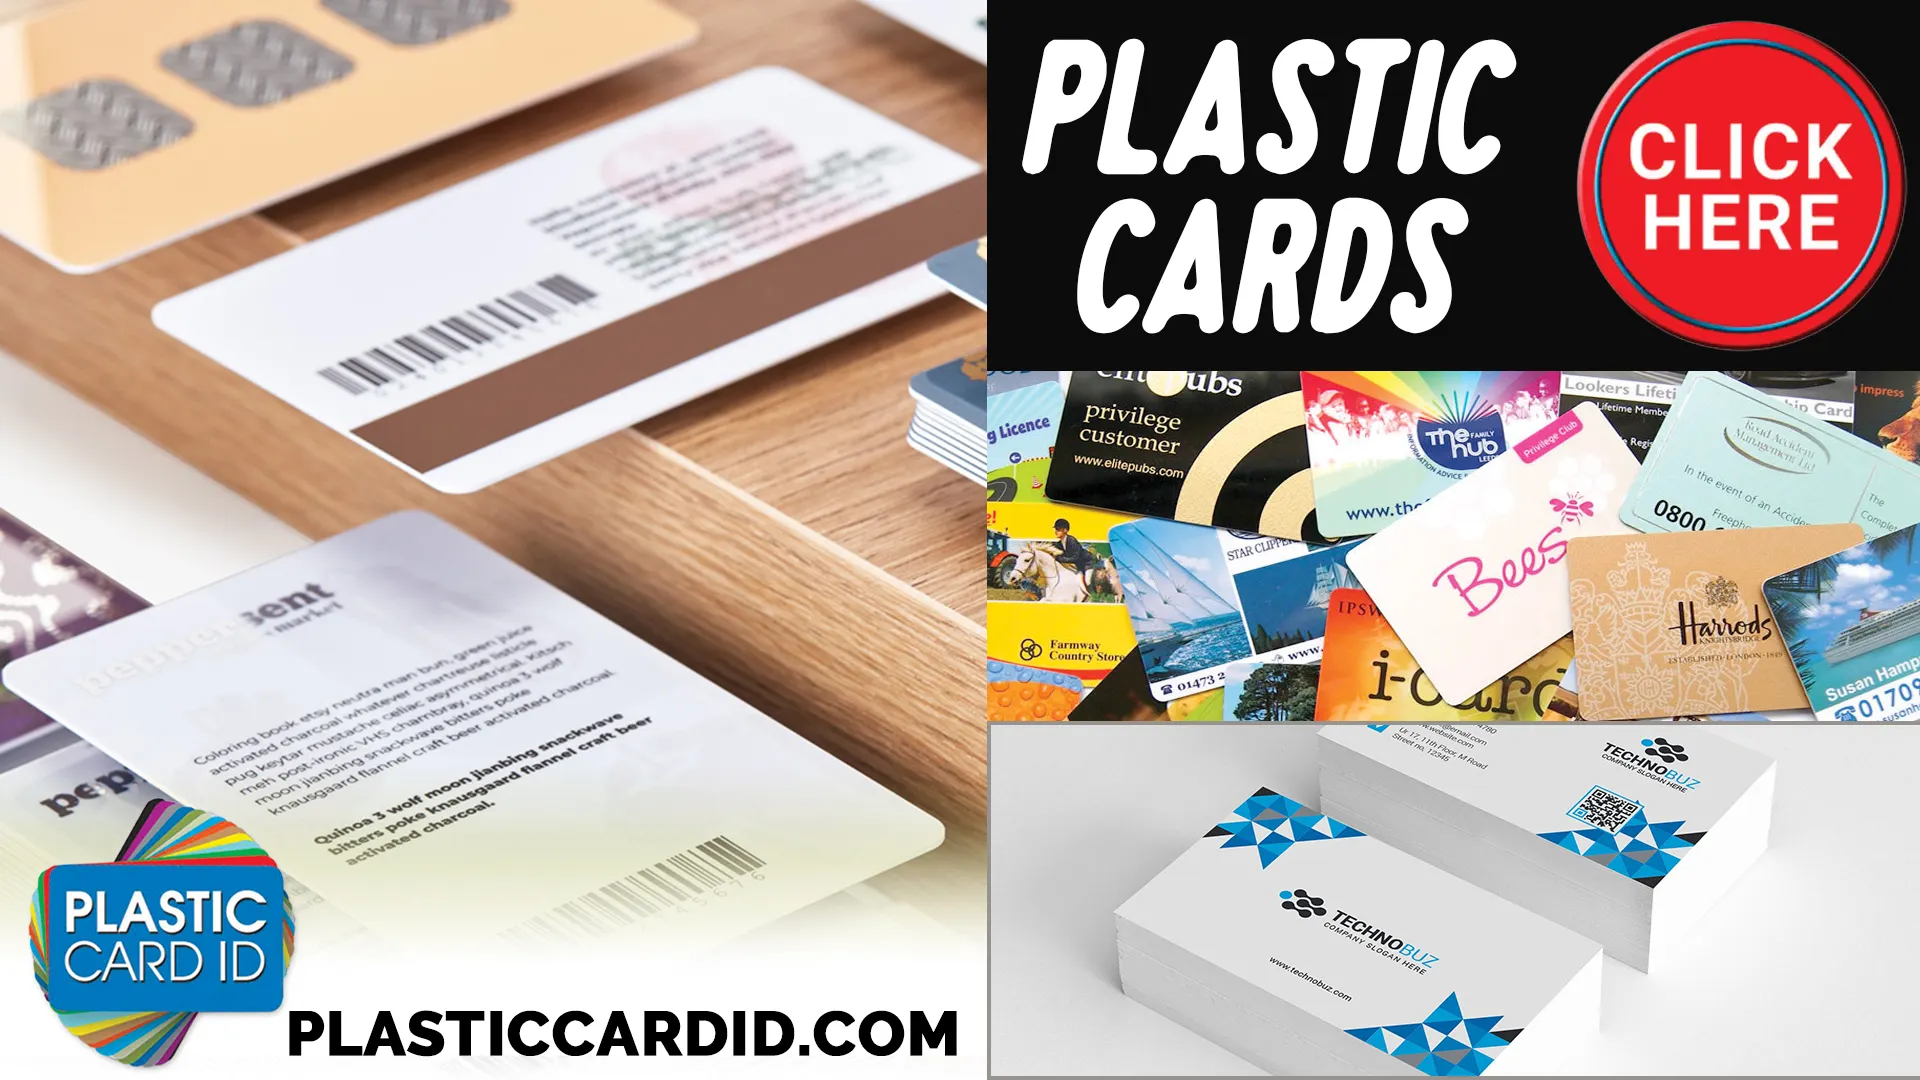 Plastic Card ID
: Offering More than Just Ink and Toner Solutions